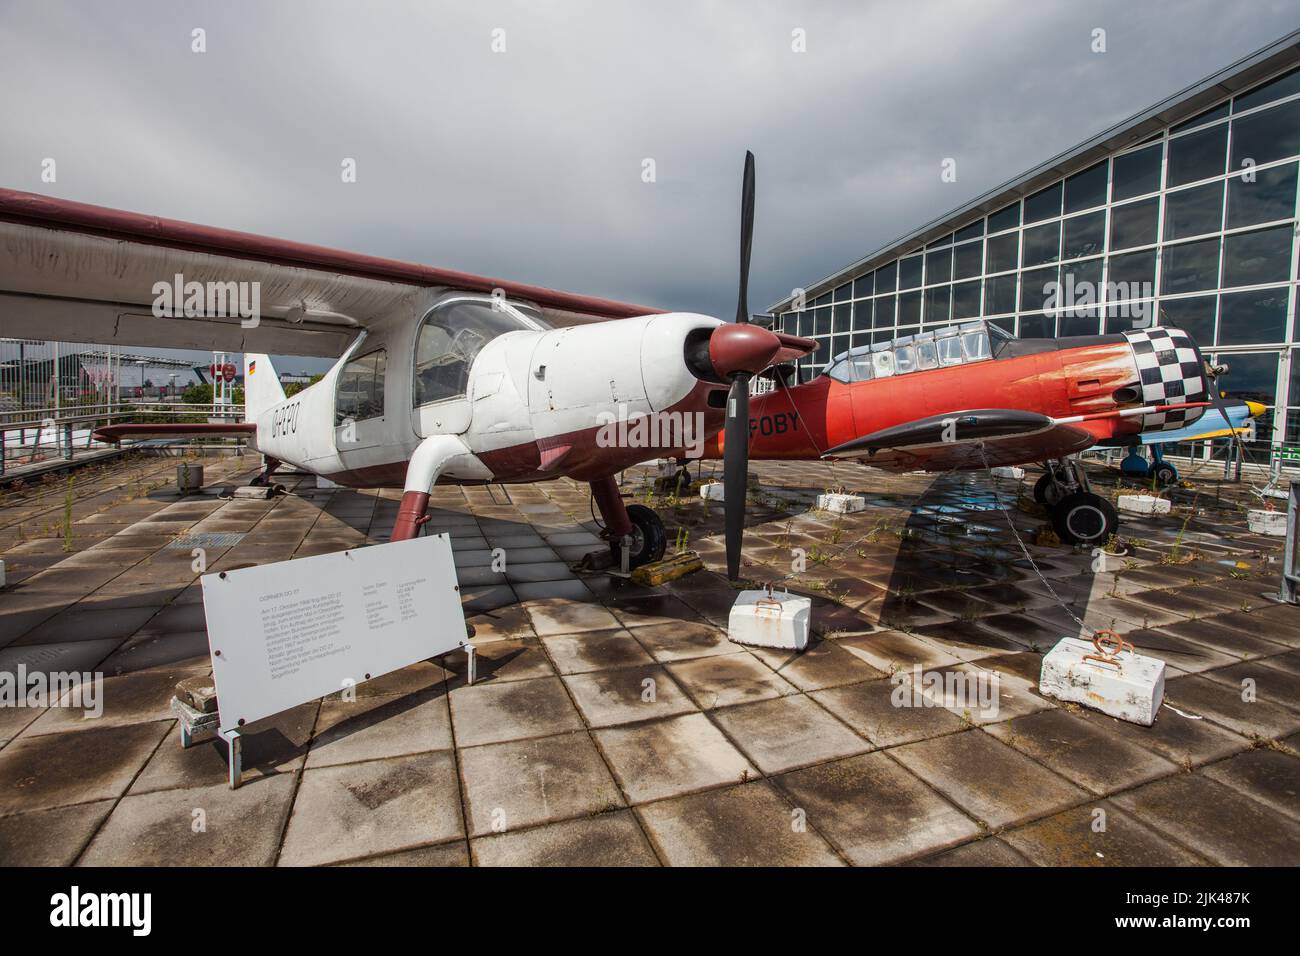 Stuttgart airport, Germany, open space airplane museum, Dornier Do 27 airplane on display Stock Photo